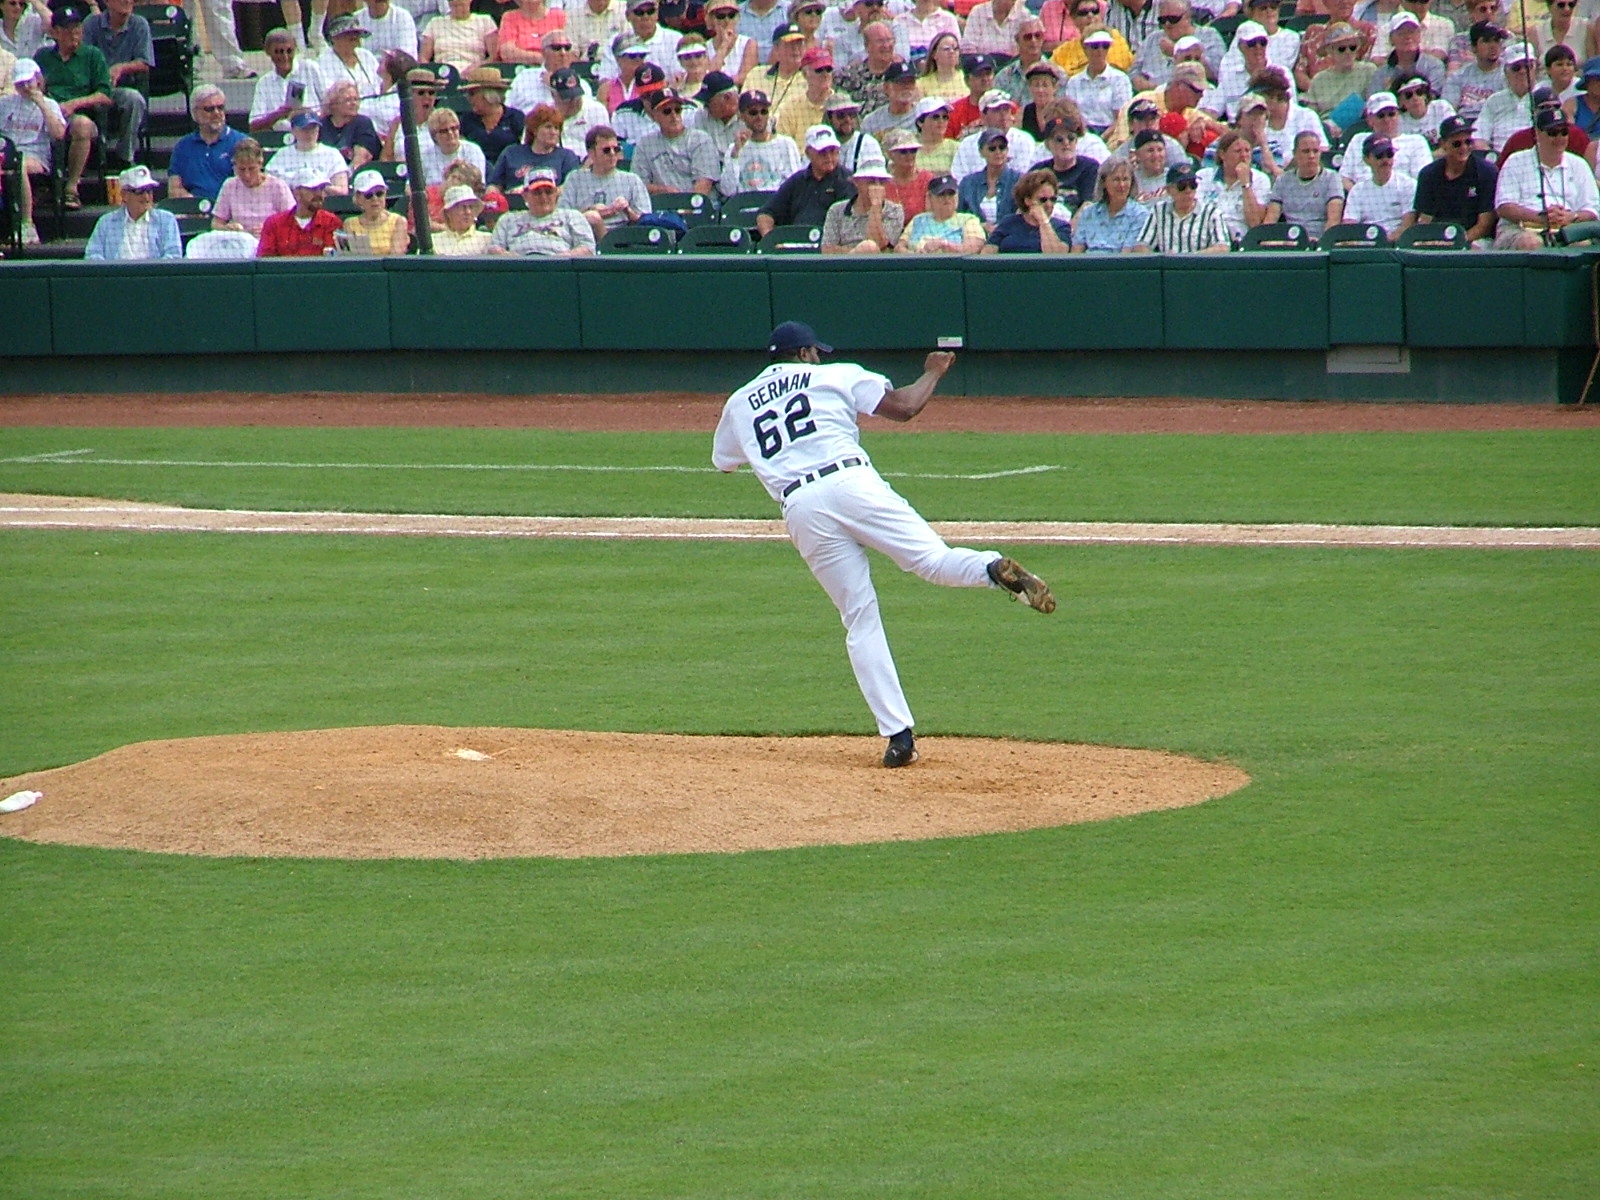 a baseball pitcher winds up to pitch the ball